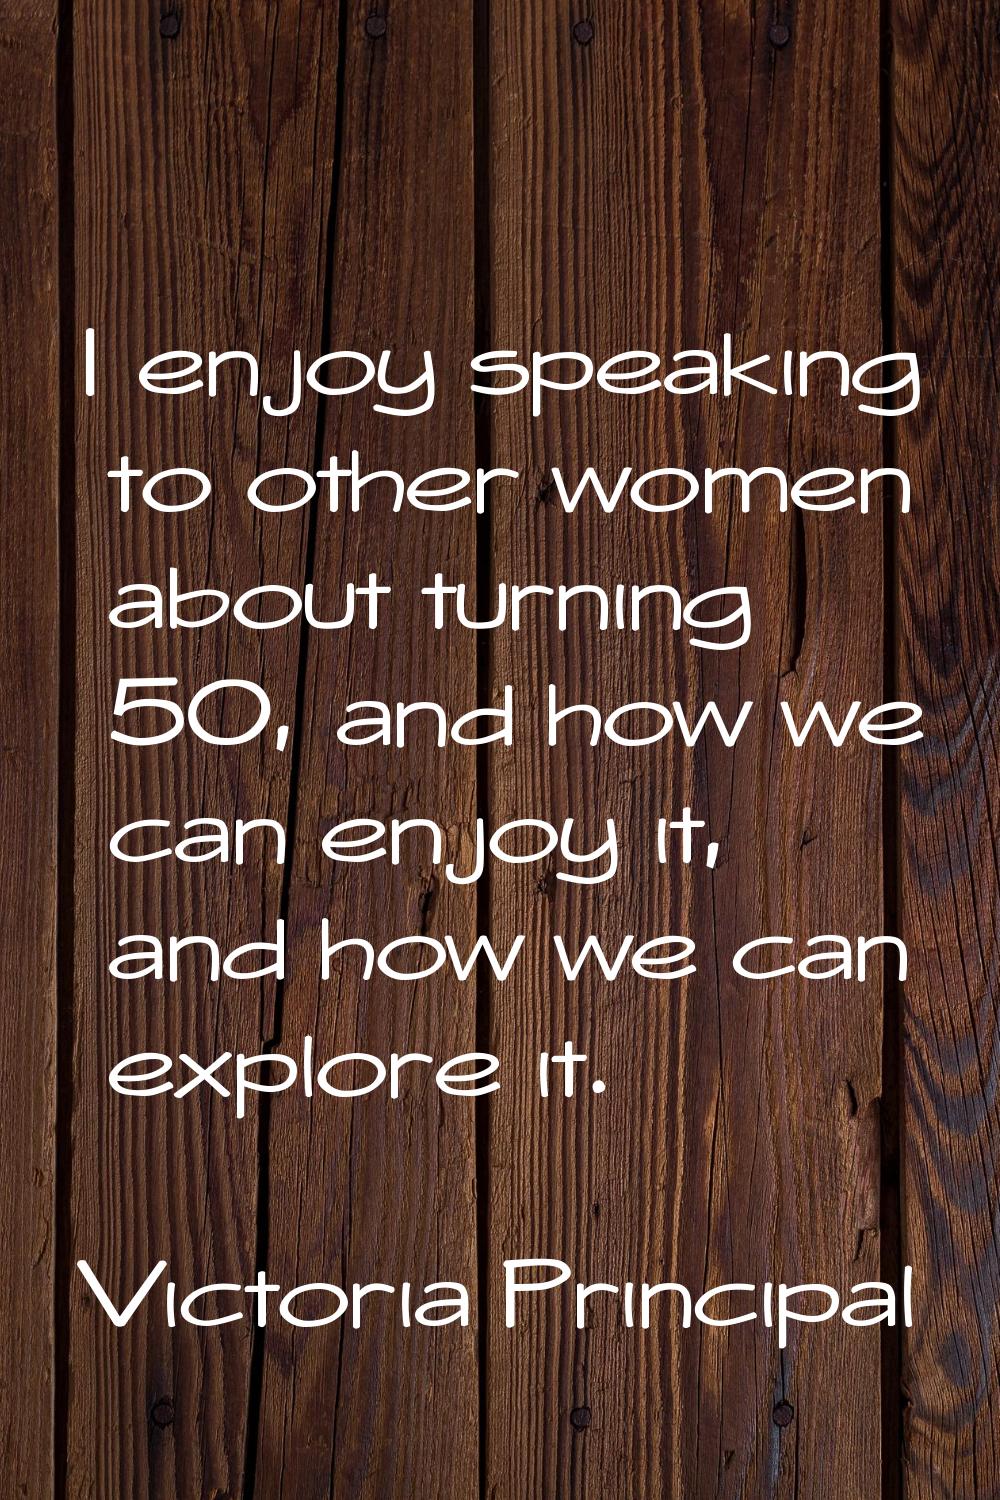 I enjoy speaking to other women about turning 50, and how we can enjoy it, and how we can explore i